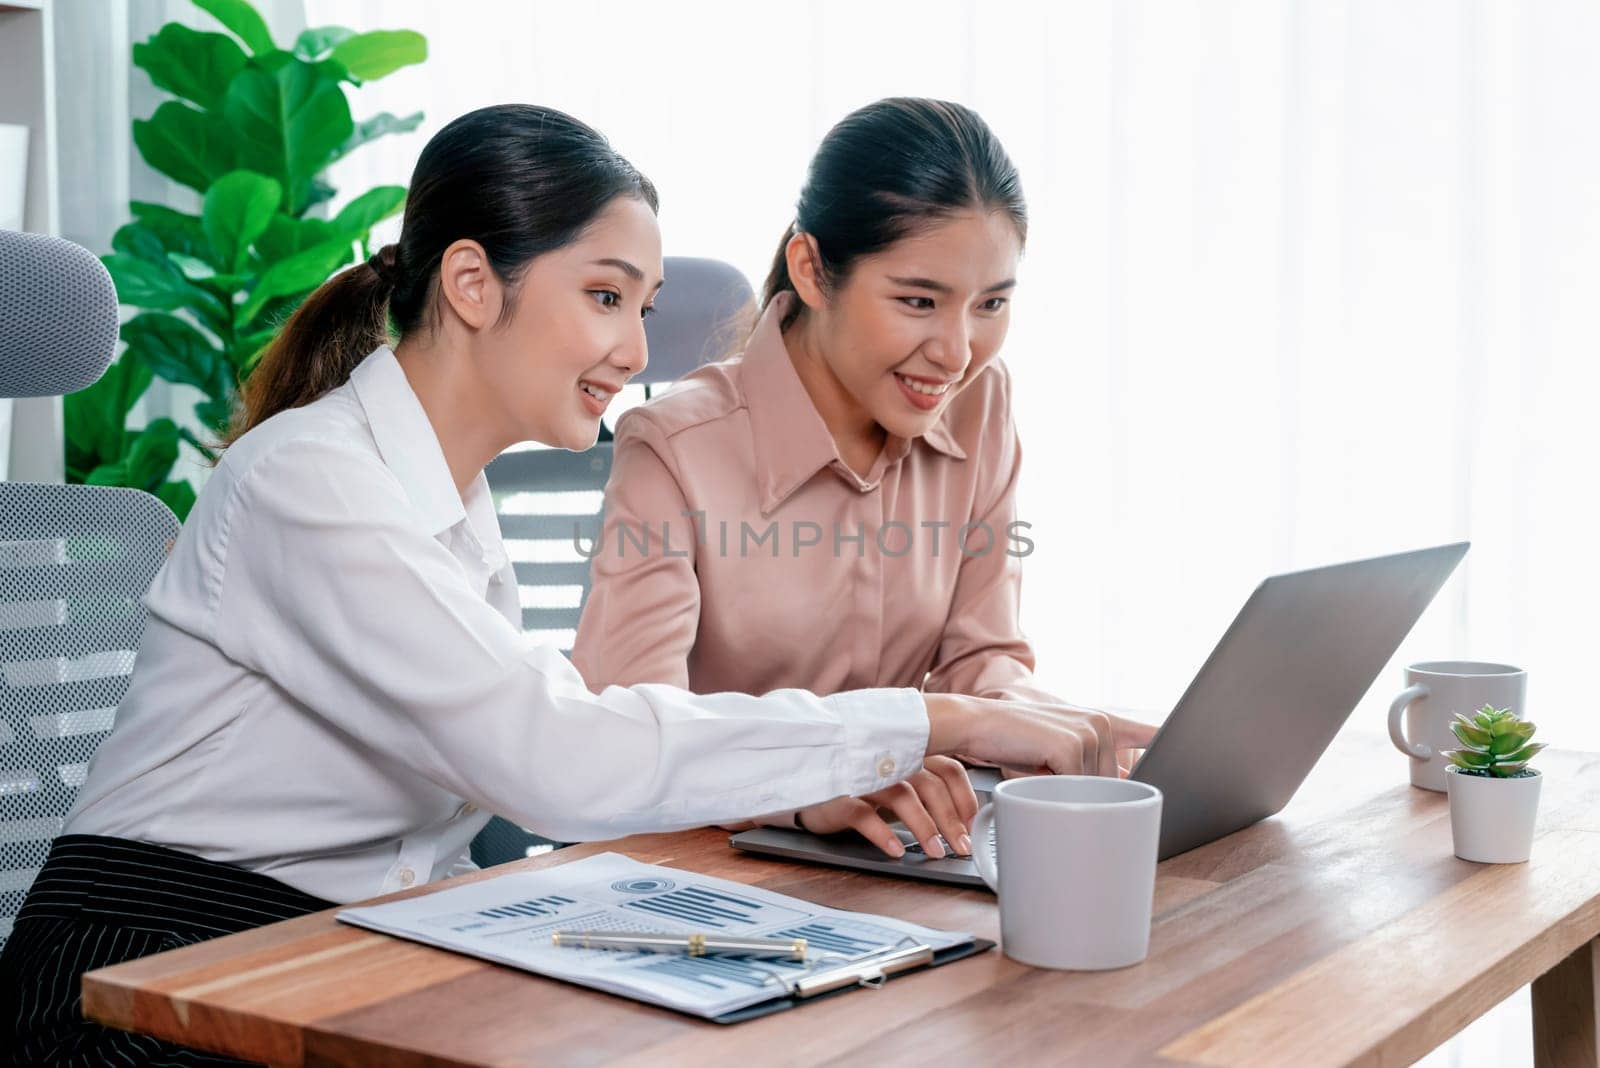 Two young businesswoman work together in office workspace. Enthusiastic by biancoblue